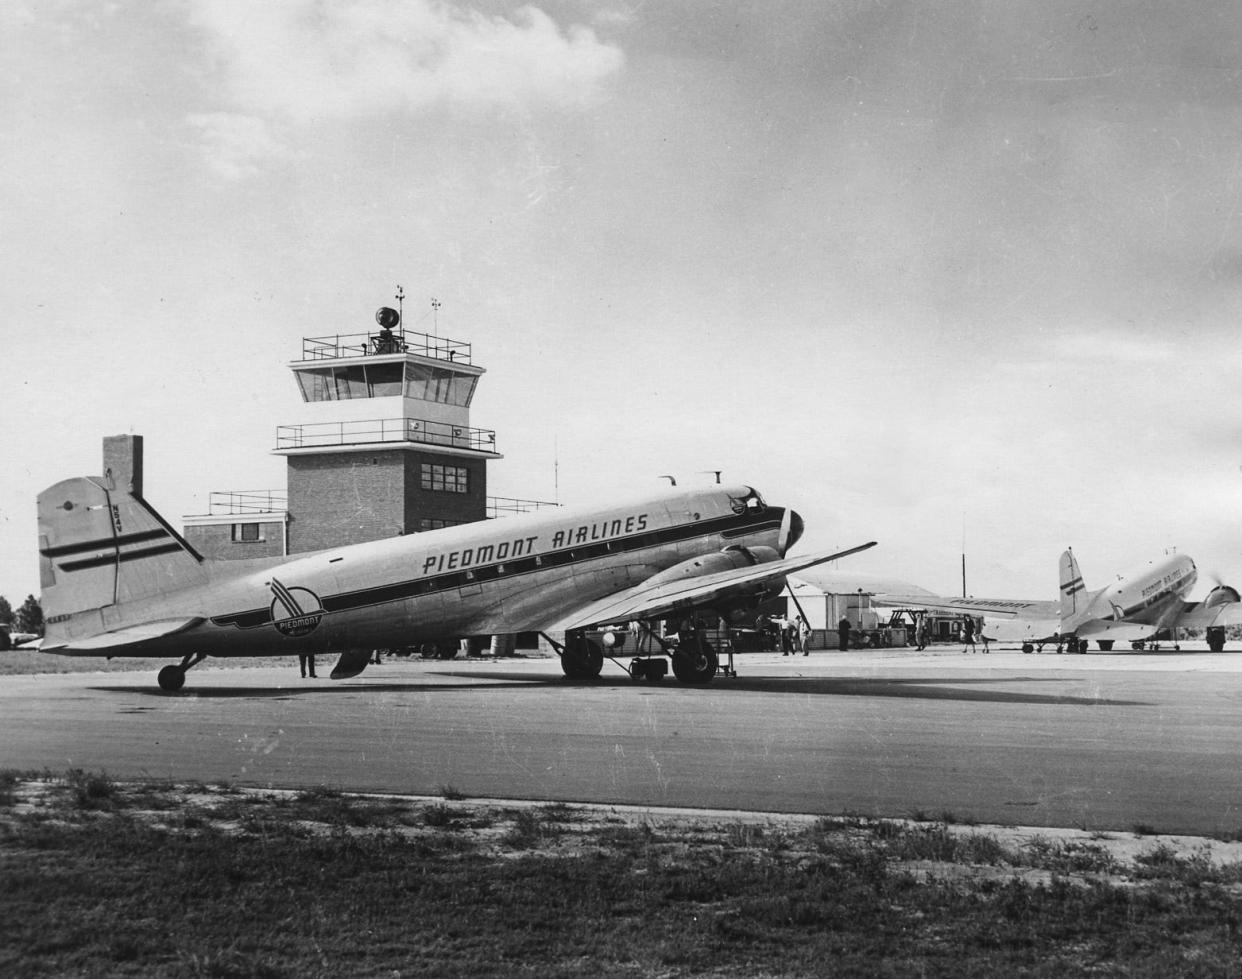 Piedmont Airlines planes at Fayetteville Regional Airport, July 27, 1960.